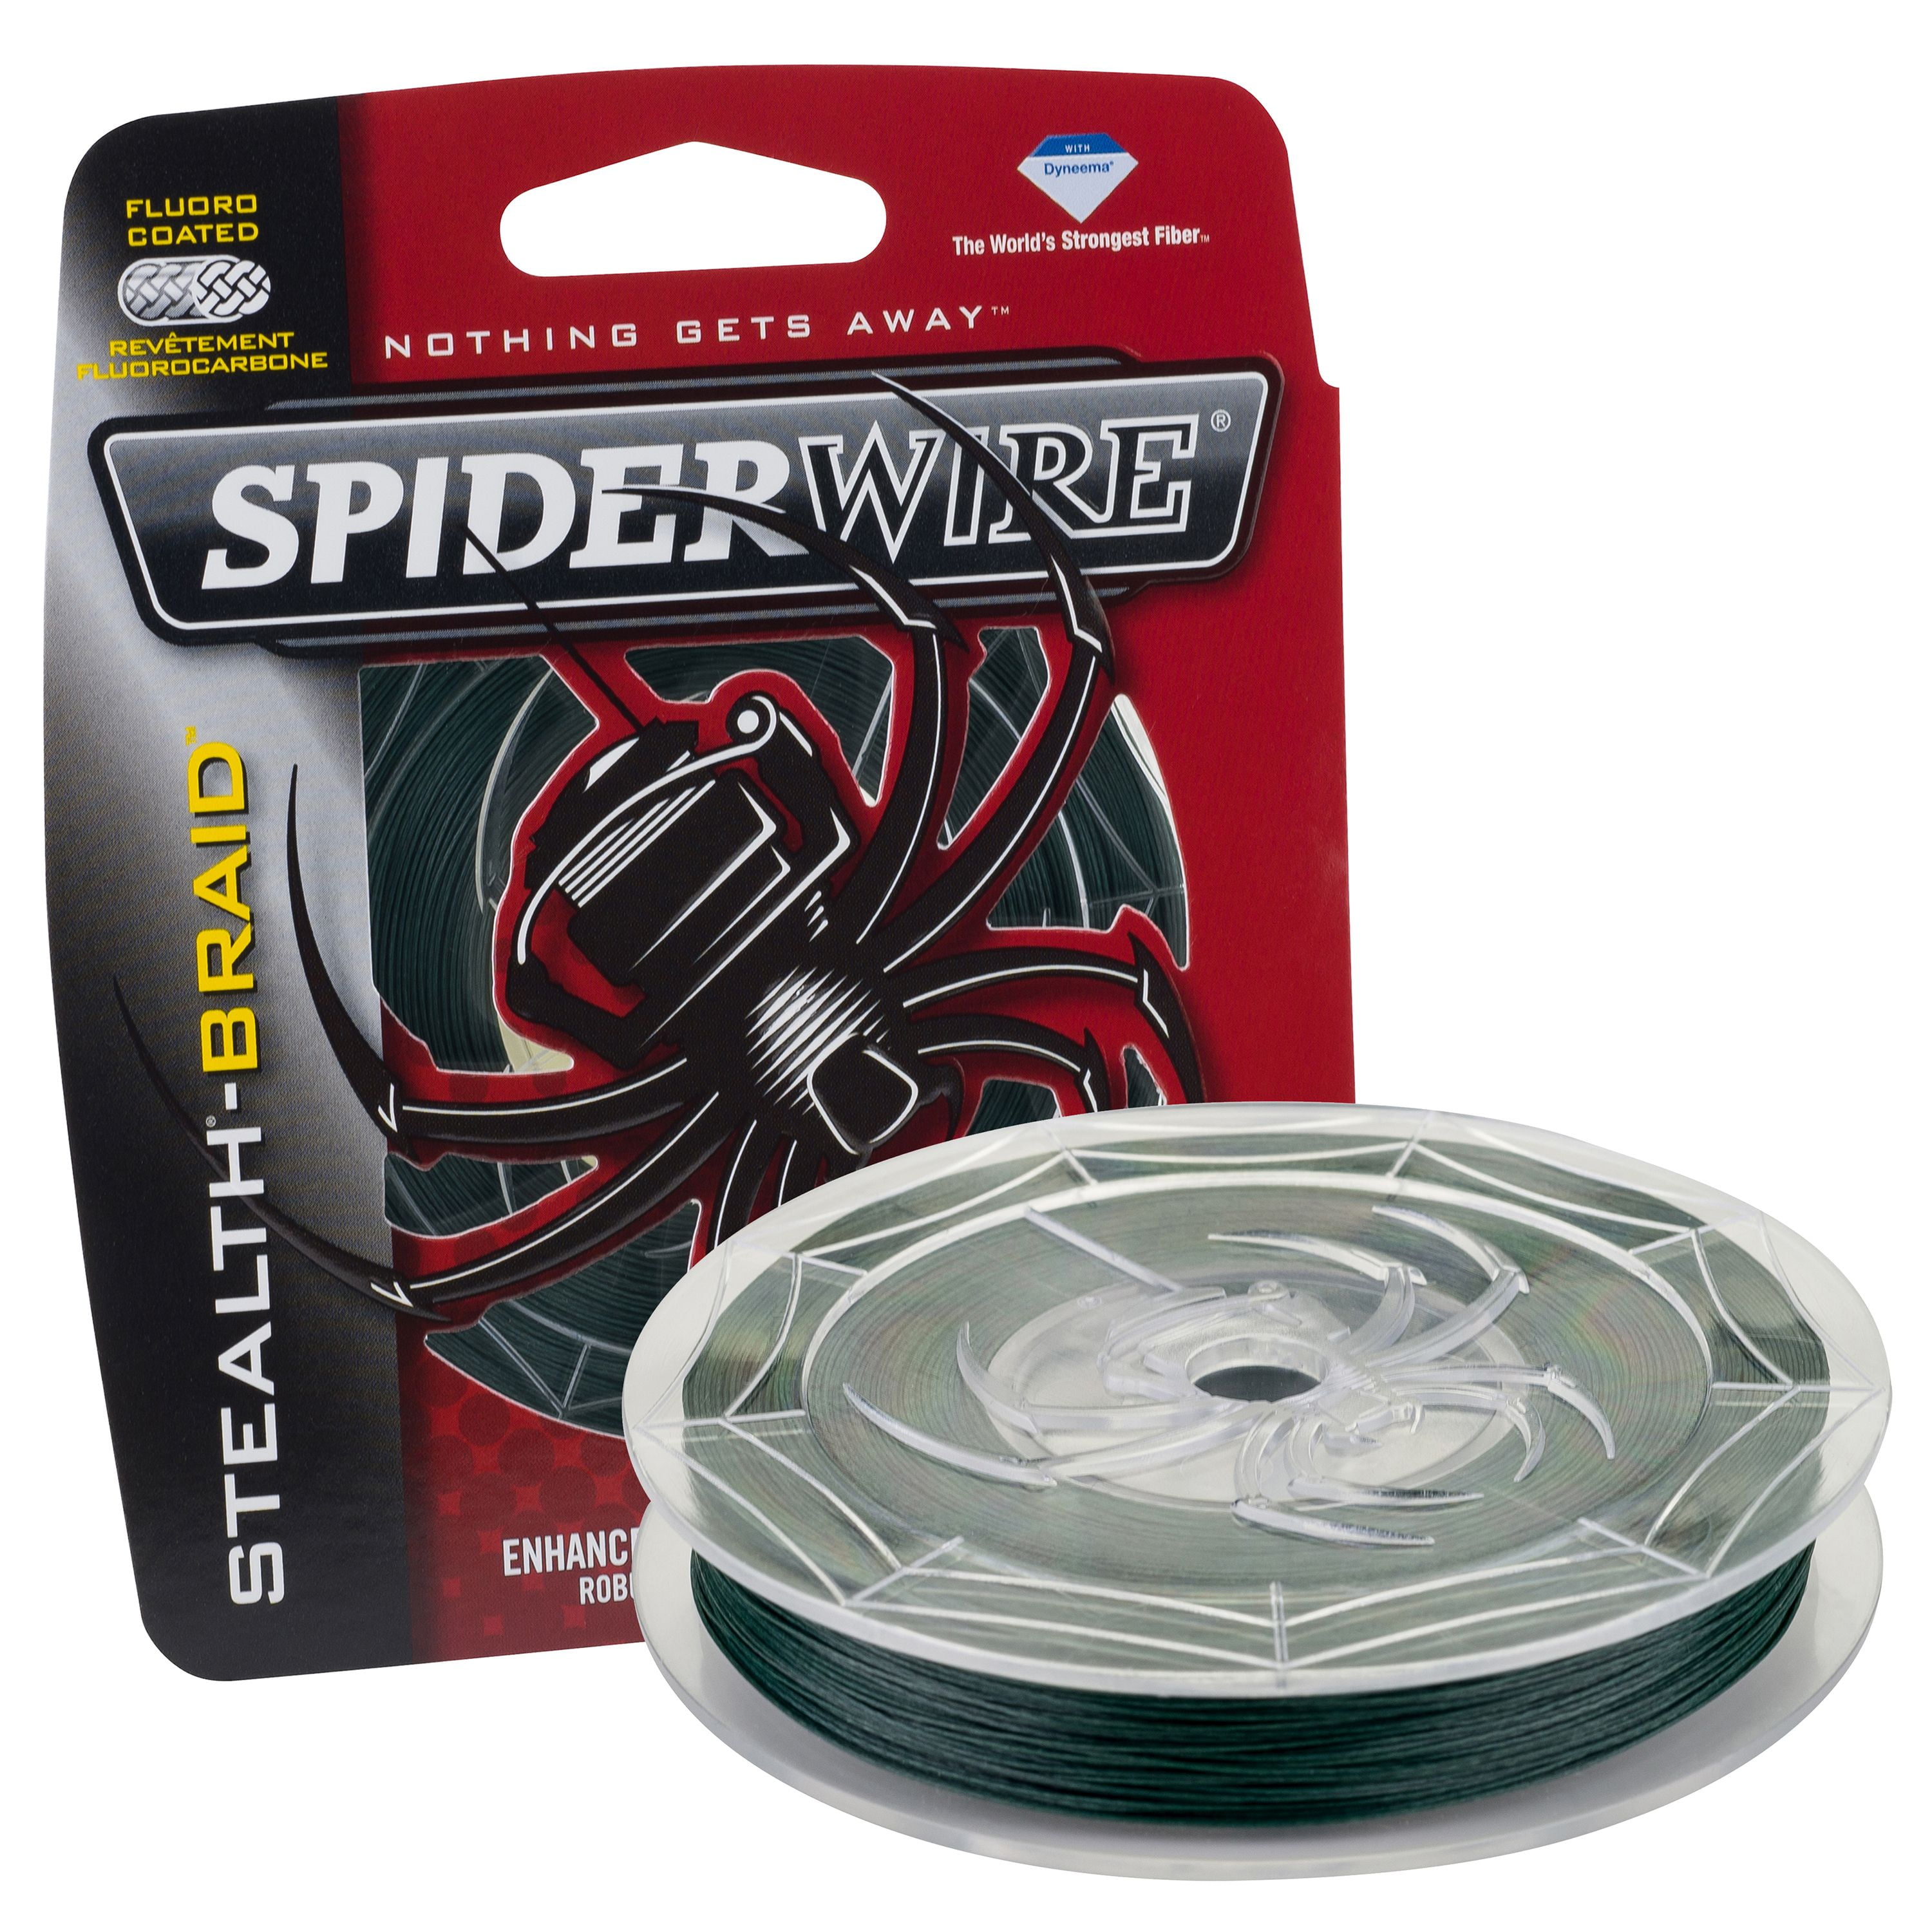 Spiderwire Monofilament Fishing Lines & Leaders 8 lb Line Weight Fishing  for sale